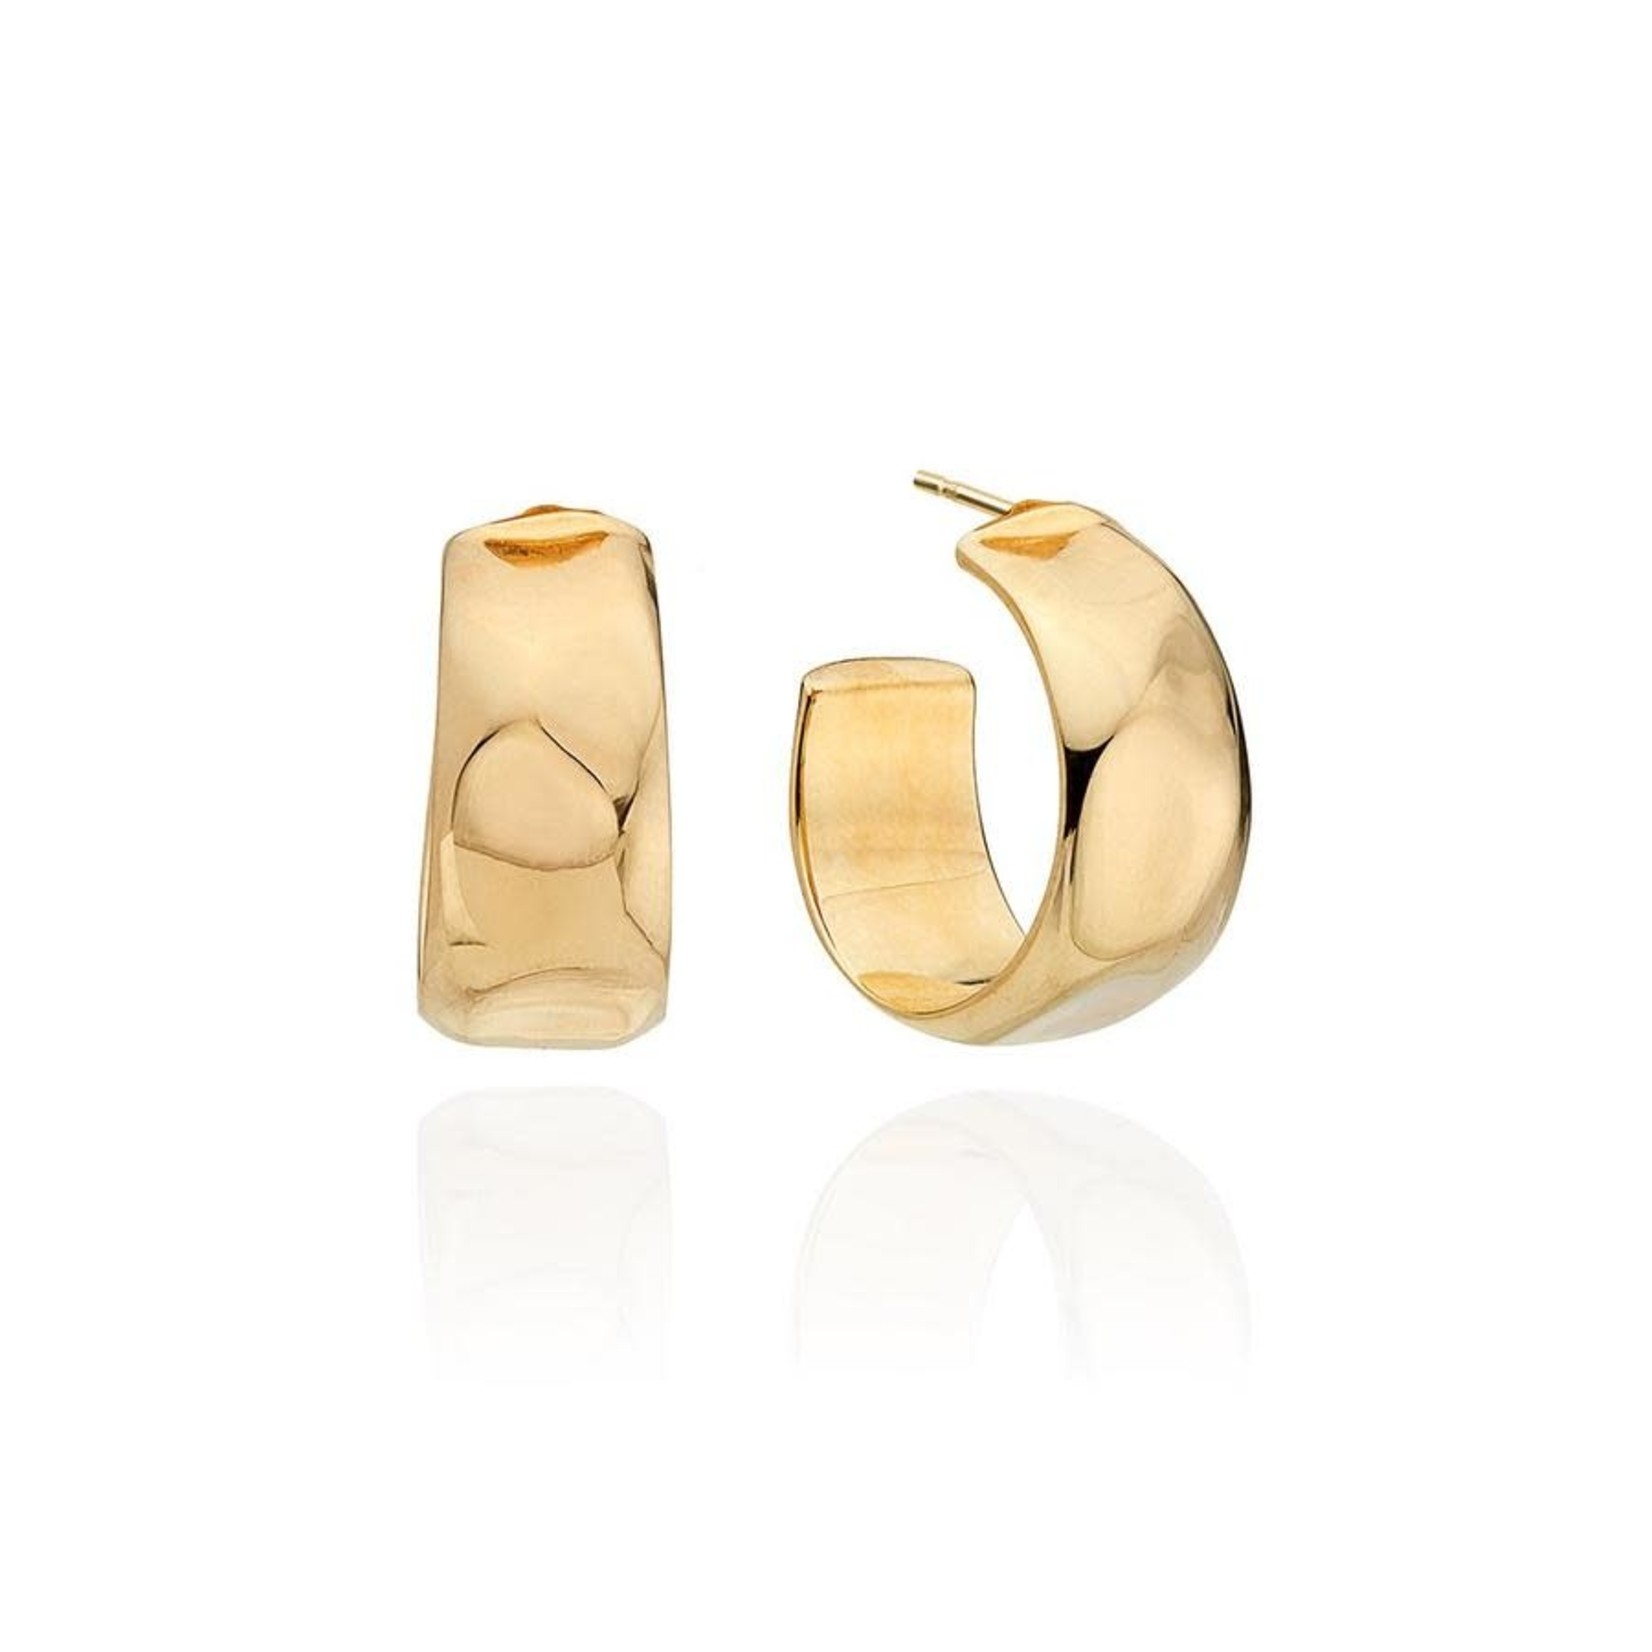 Small Hammered Hoop Earrings - 18k Gold Plate over Sterling